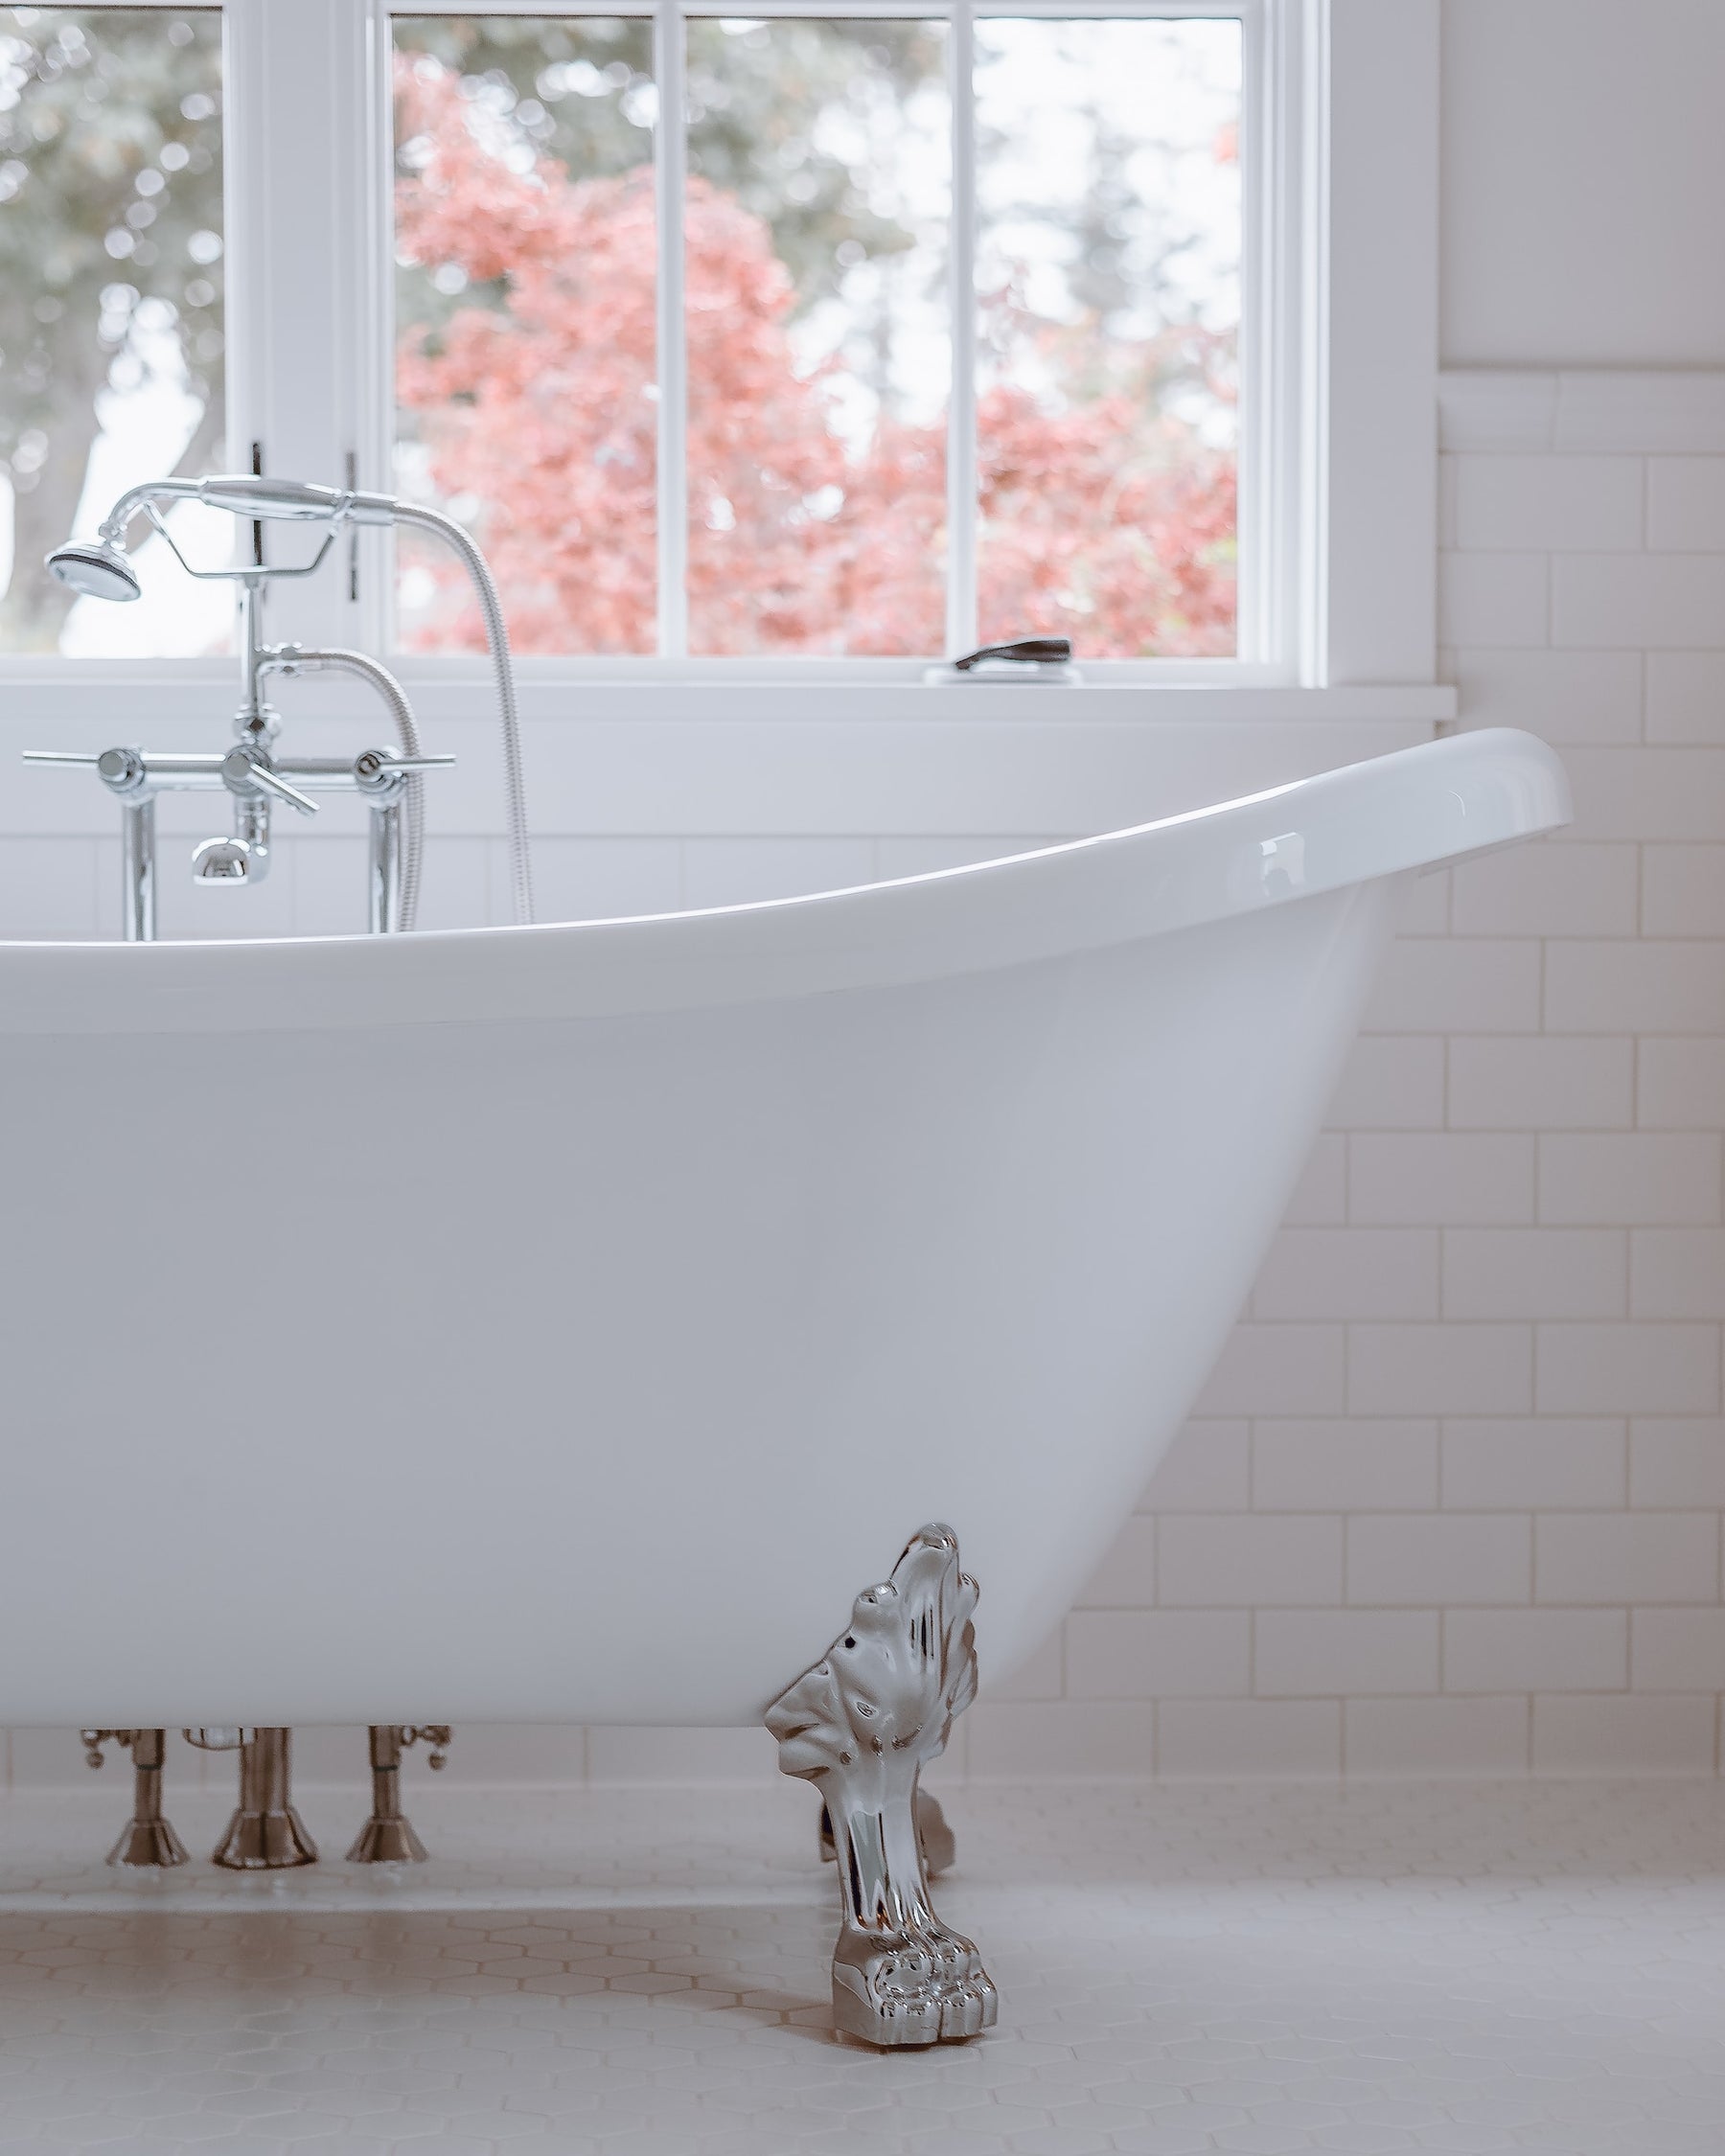 Finding Your Perfect Fit: What is the Optimum Bath Length?